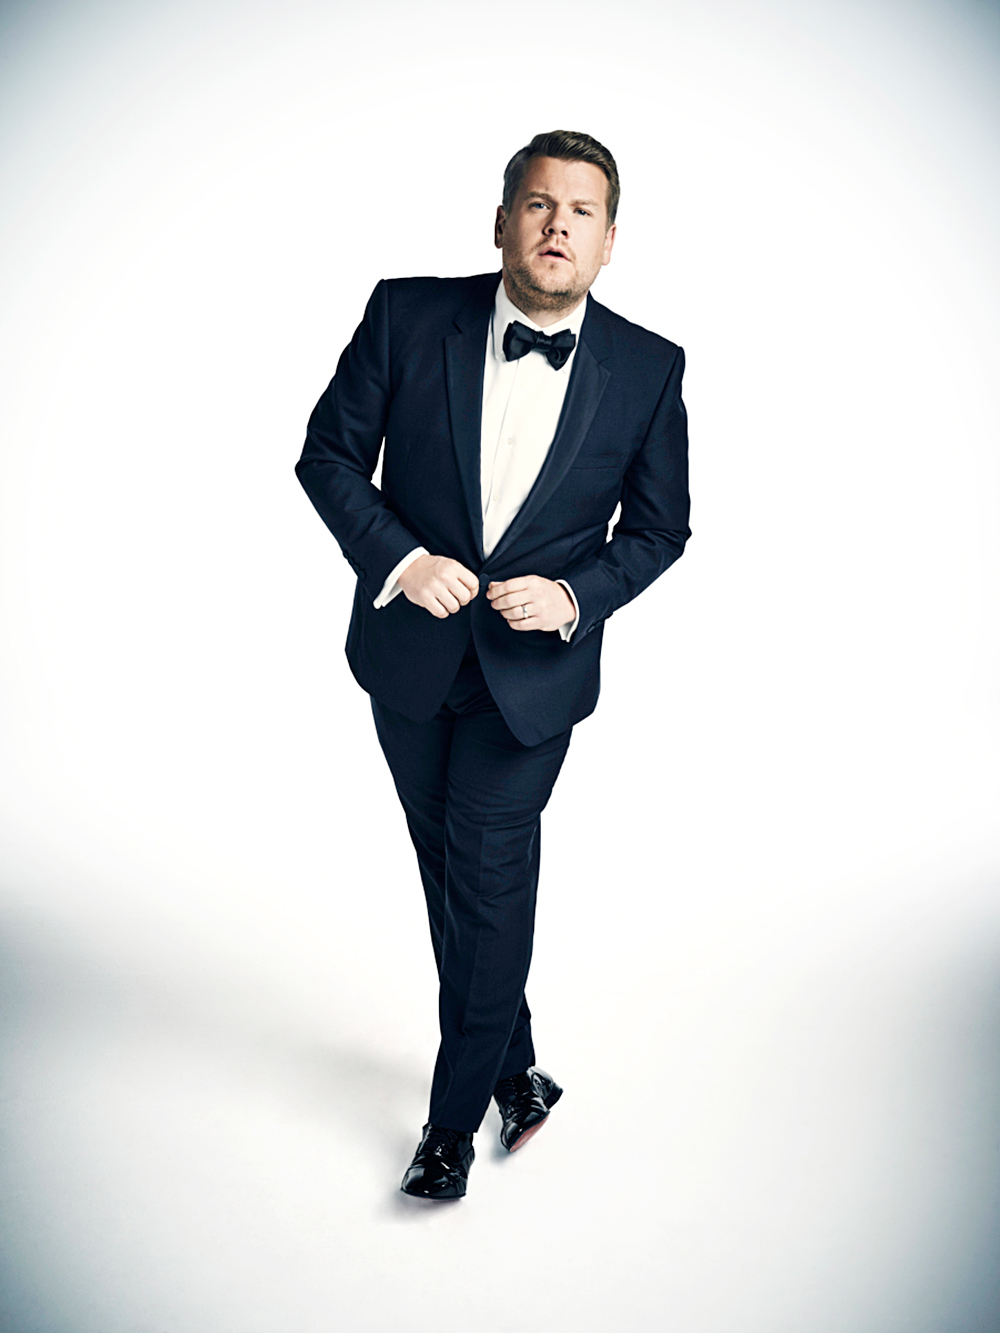 James Corden Tony Awards 2019 Everything You Need to Know